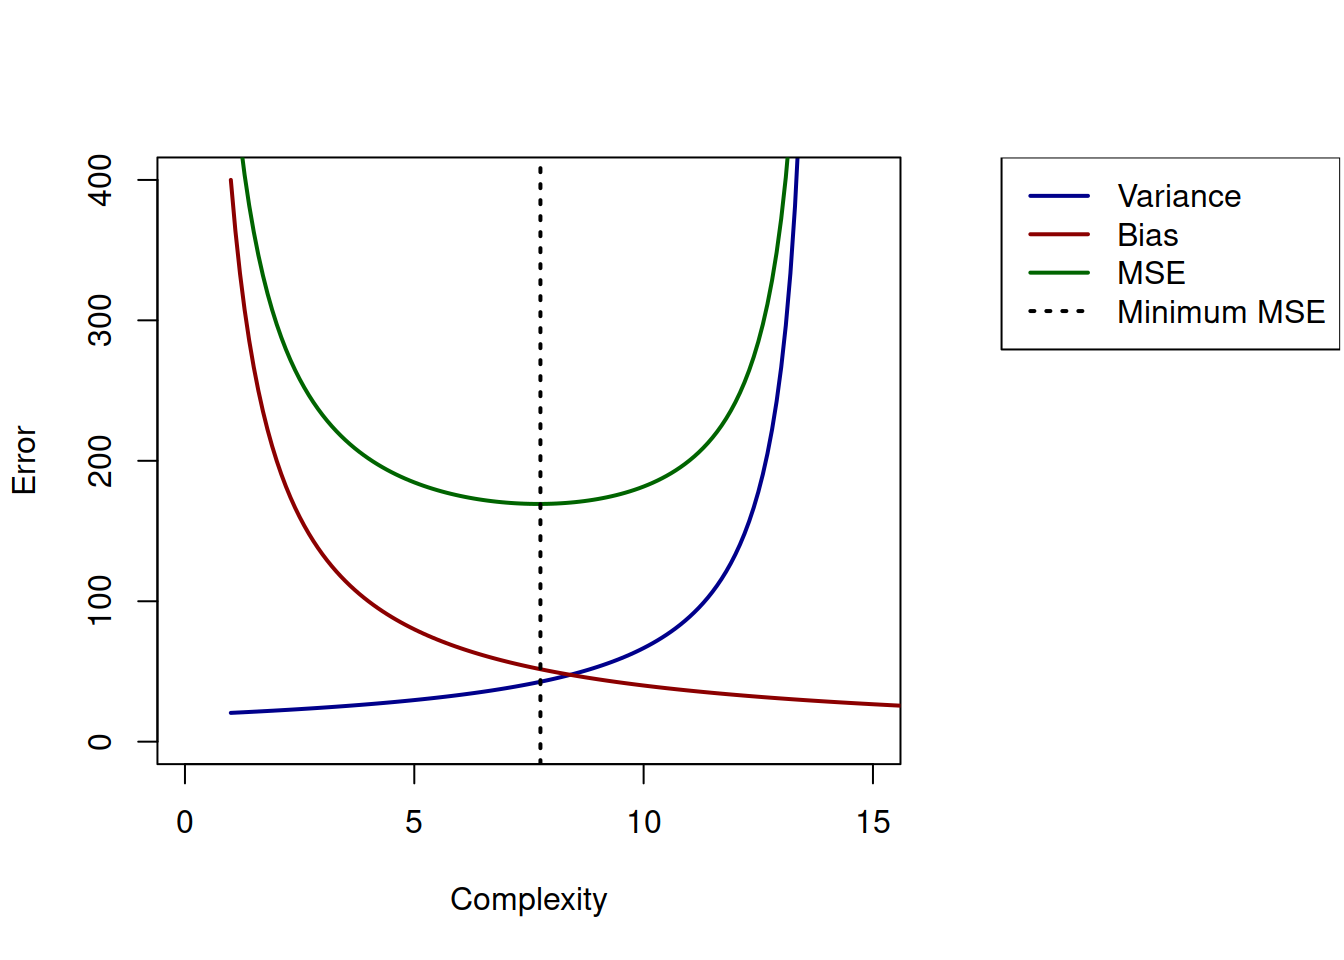 Bias, Variance and MSE as functions of model complexity.